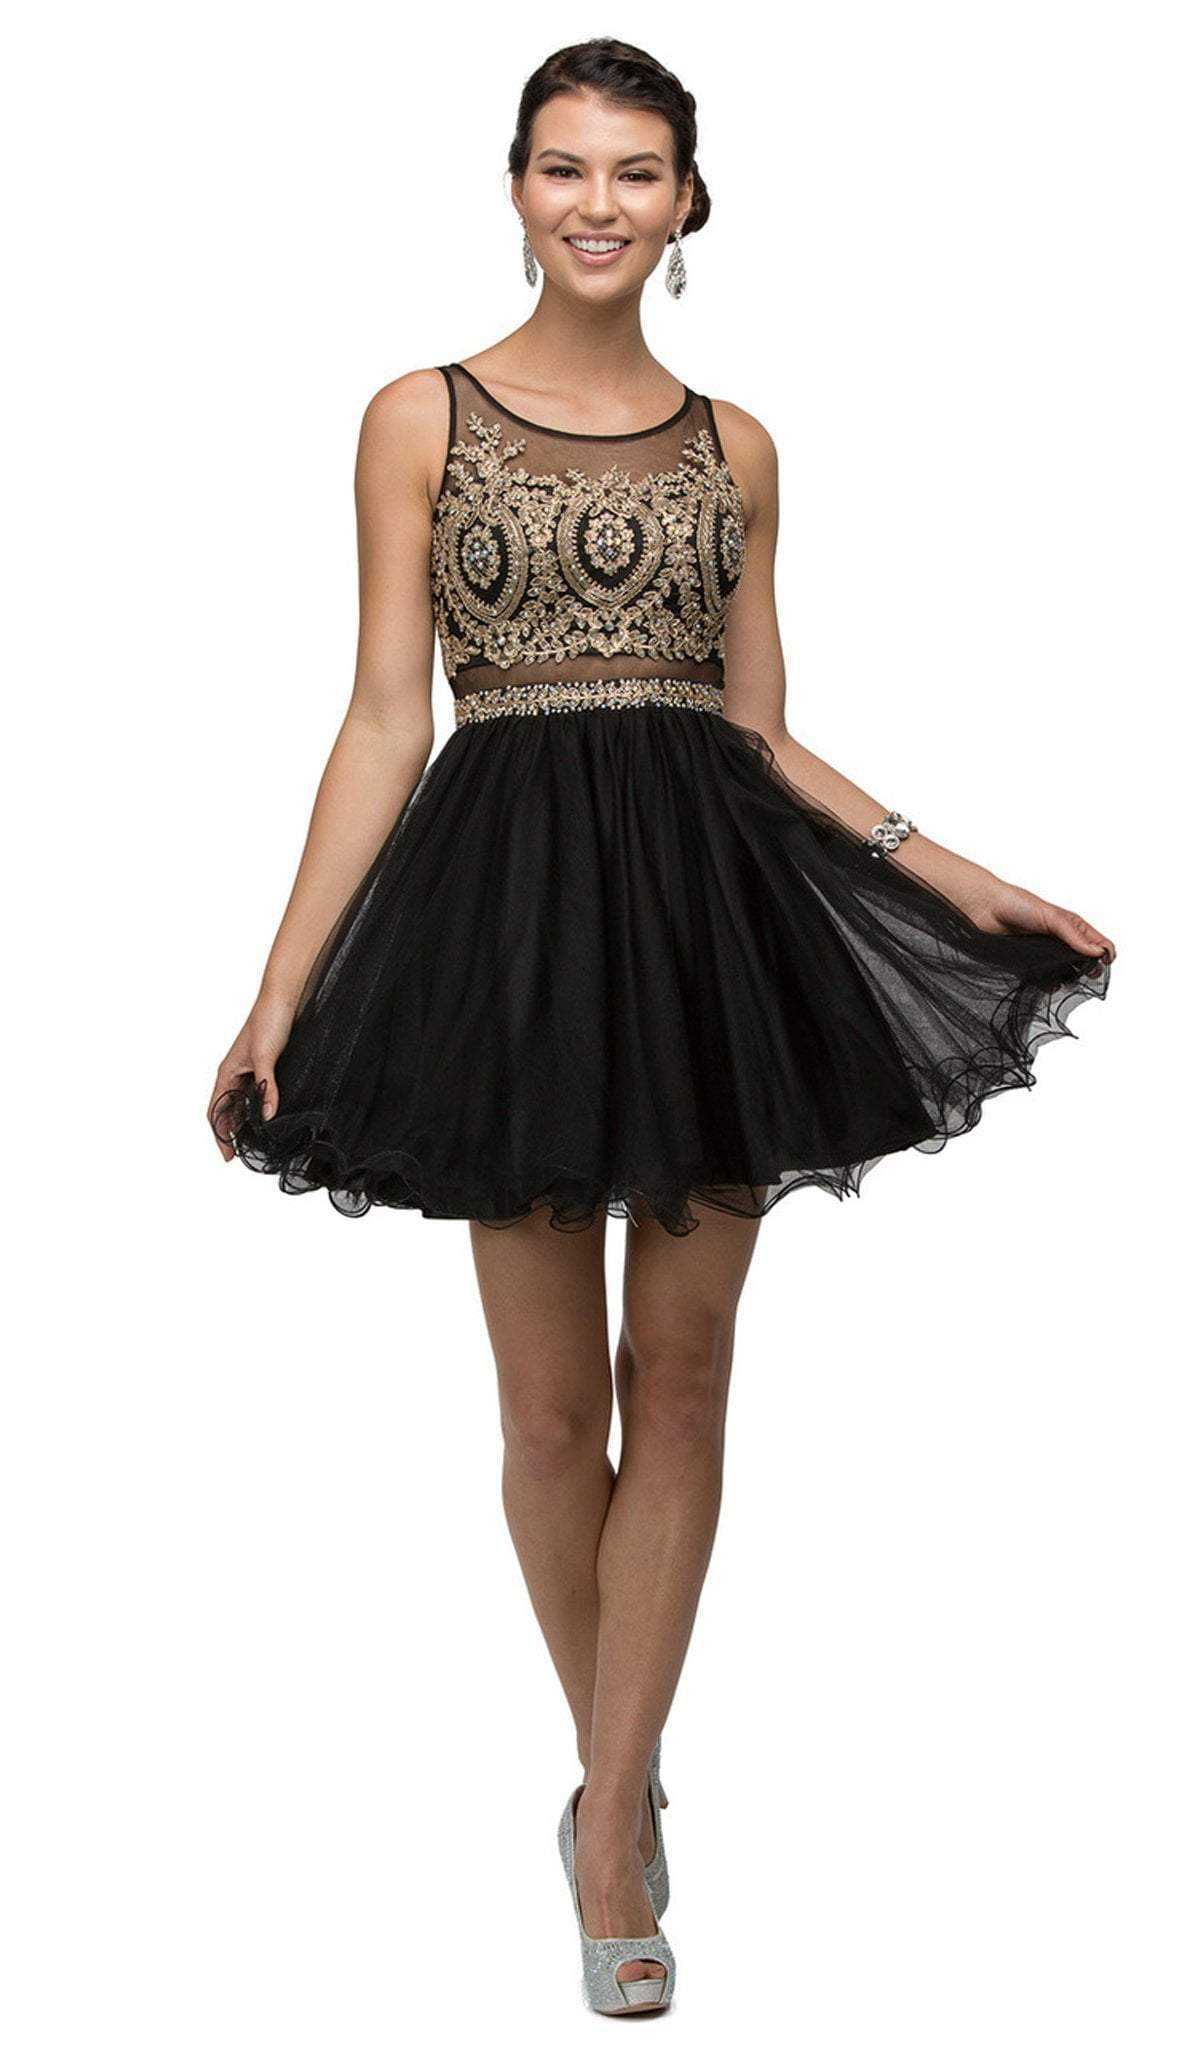 Dancing Queen, Dancing Queen - 9518 Lace Embellished Illusion A-Line Short Prom Dress